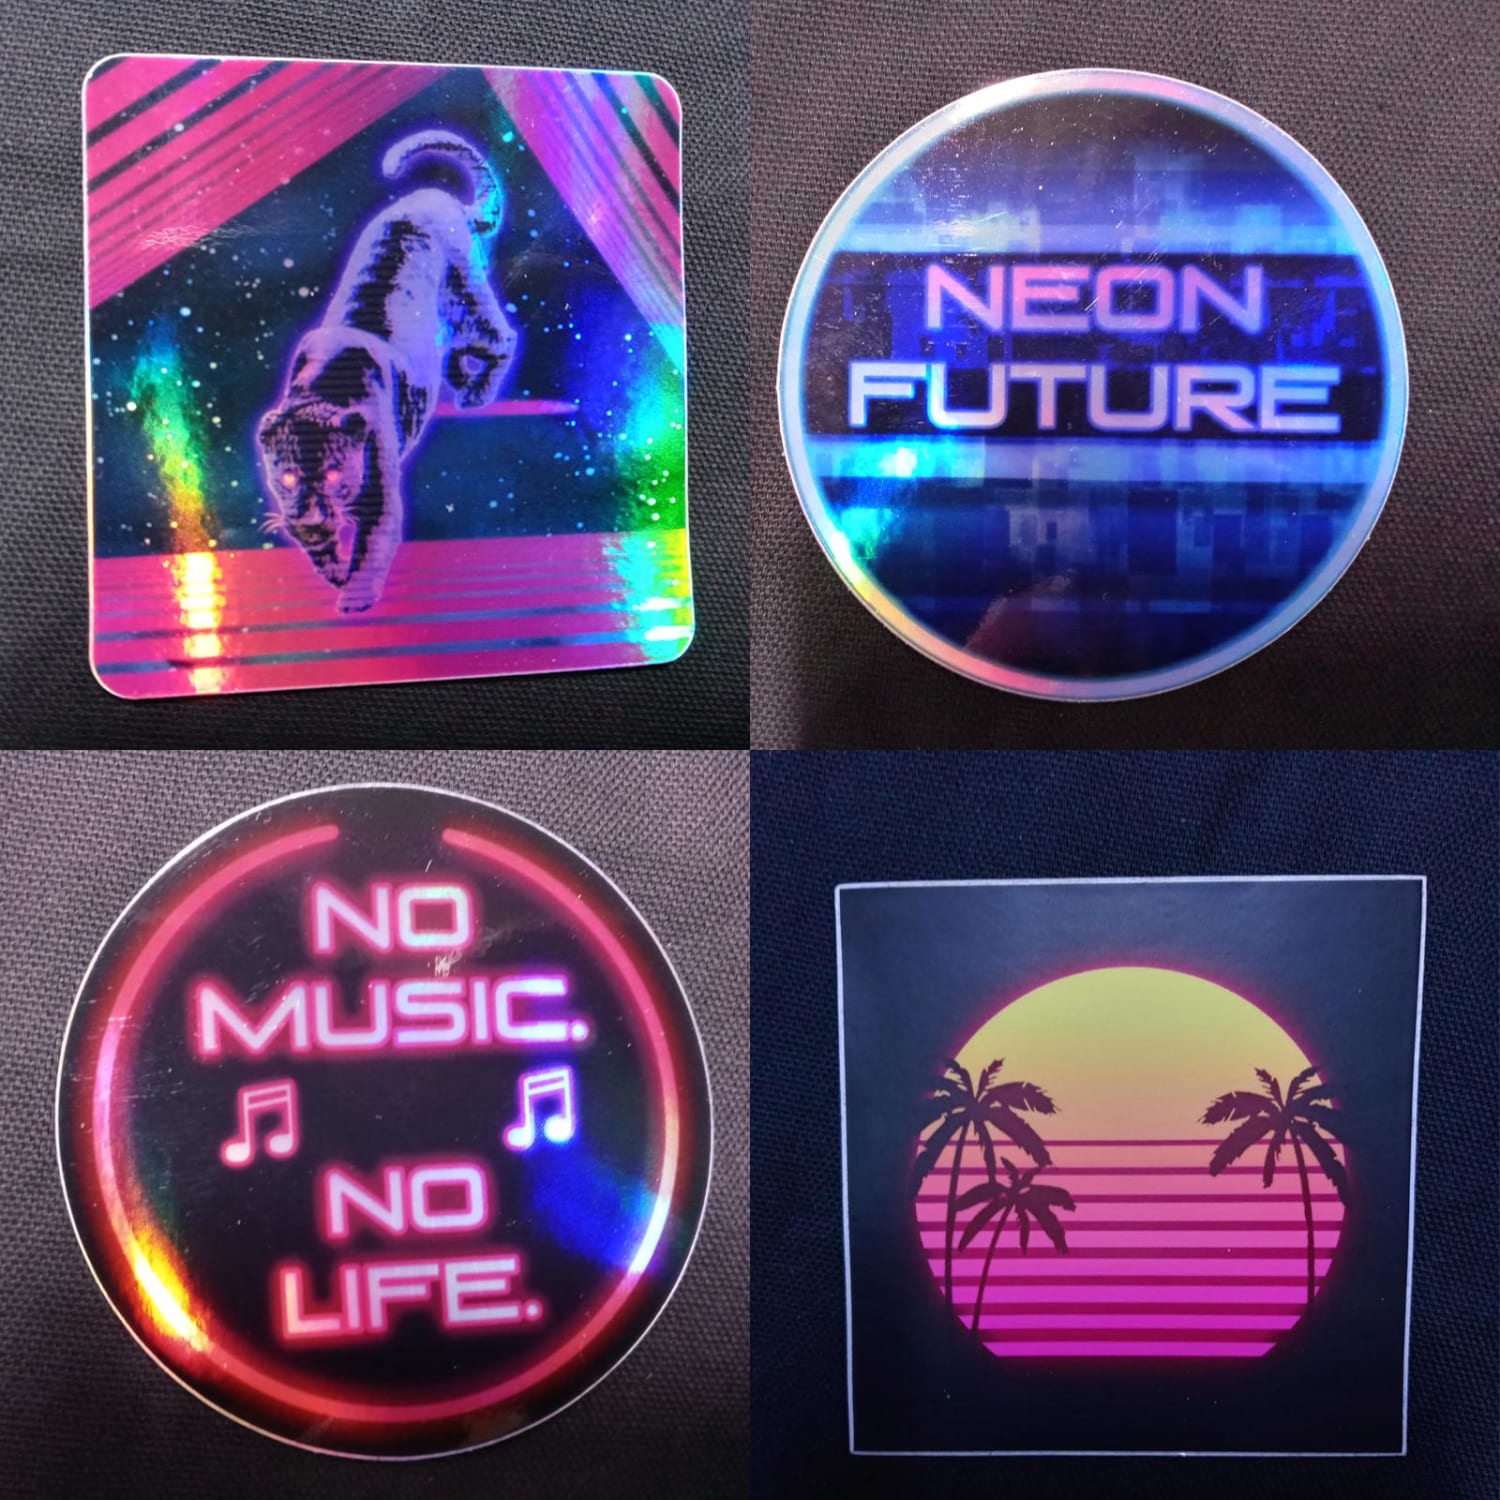 Love painting Synthwave styled artwork so much, I turned some into holographic stickers!